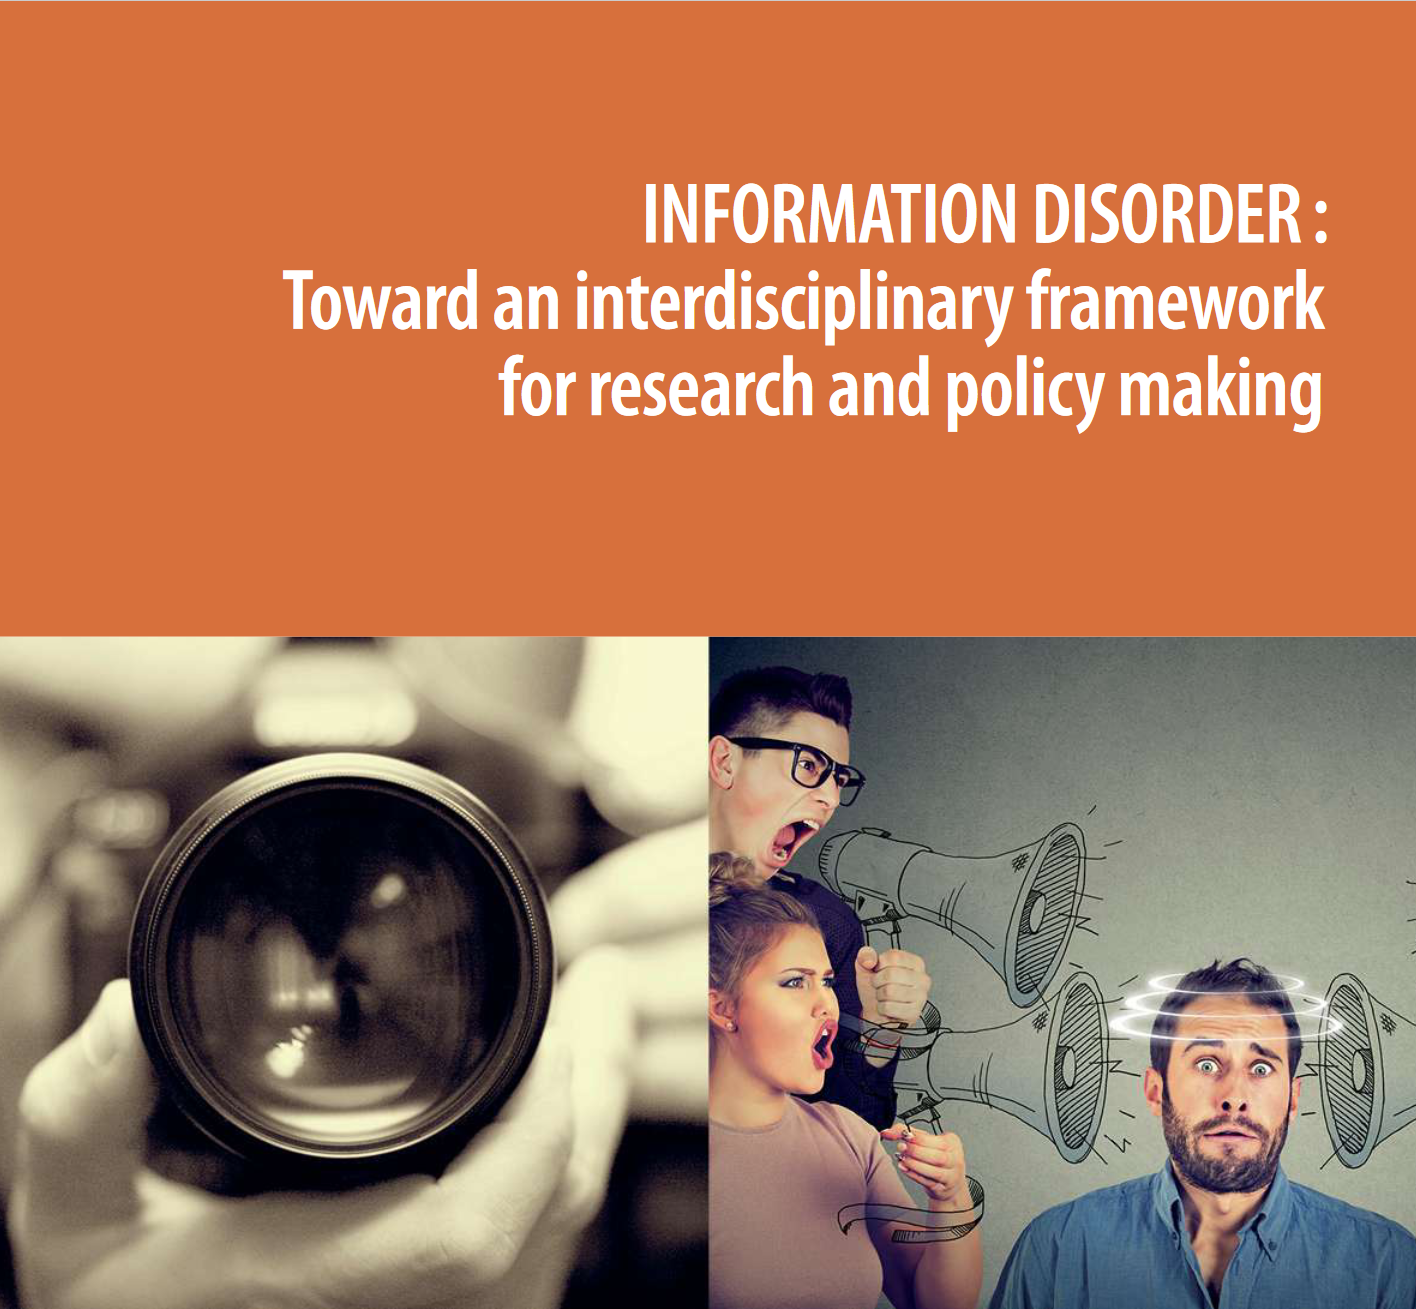 Report: Information disorder: Toward an interdisciplinary framework for research and policy making (2017)